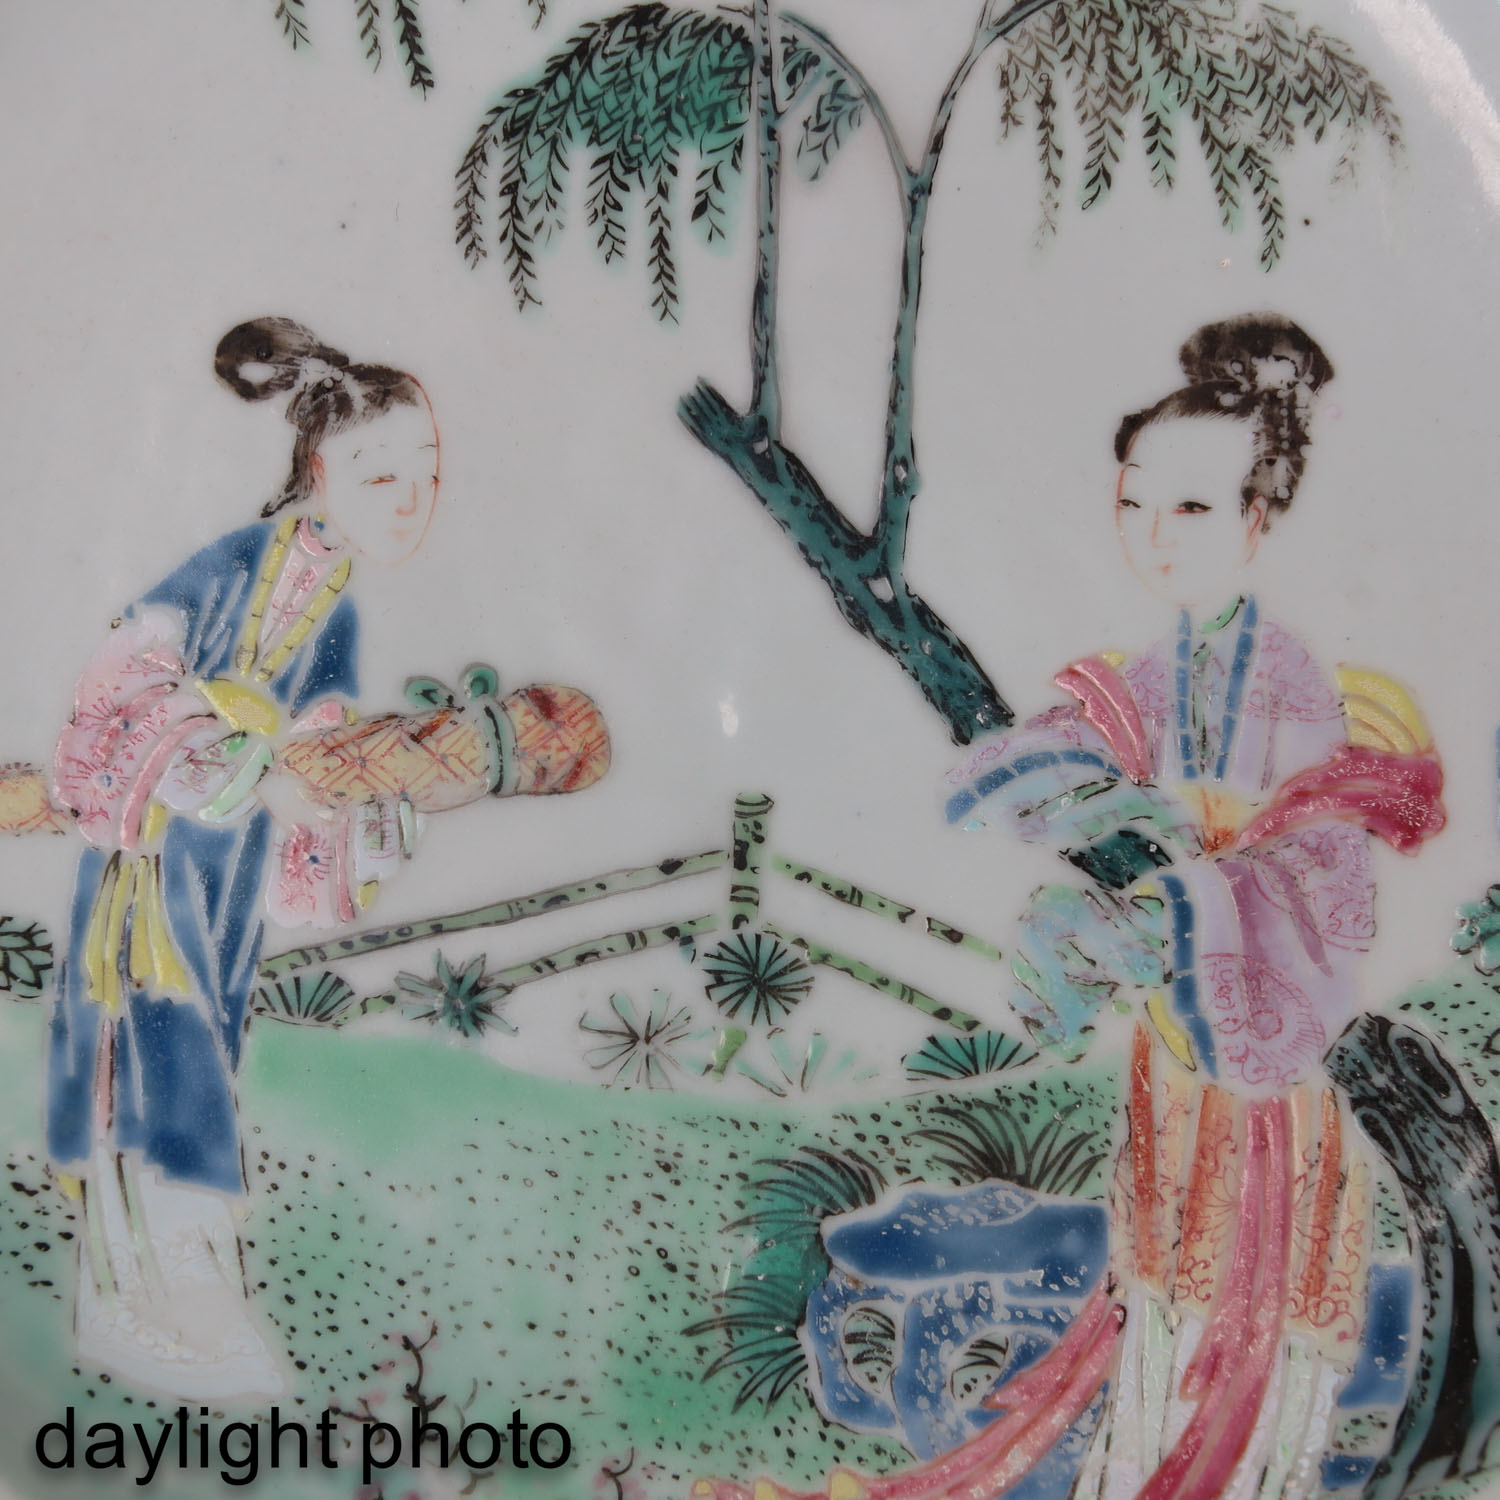 A Famille Rose Plate - Image 5 of 5